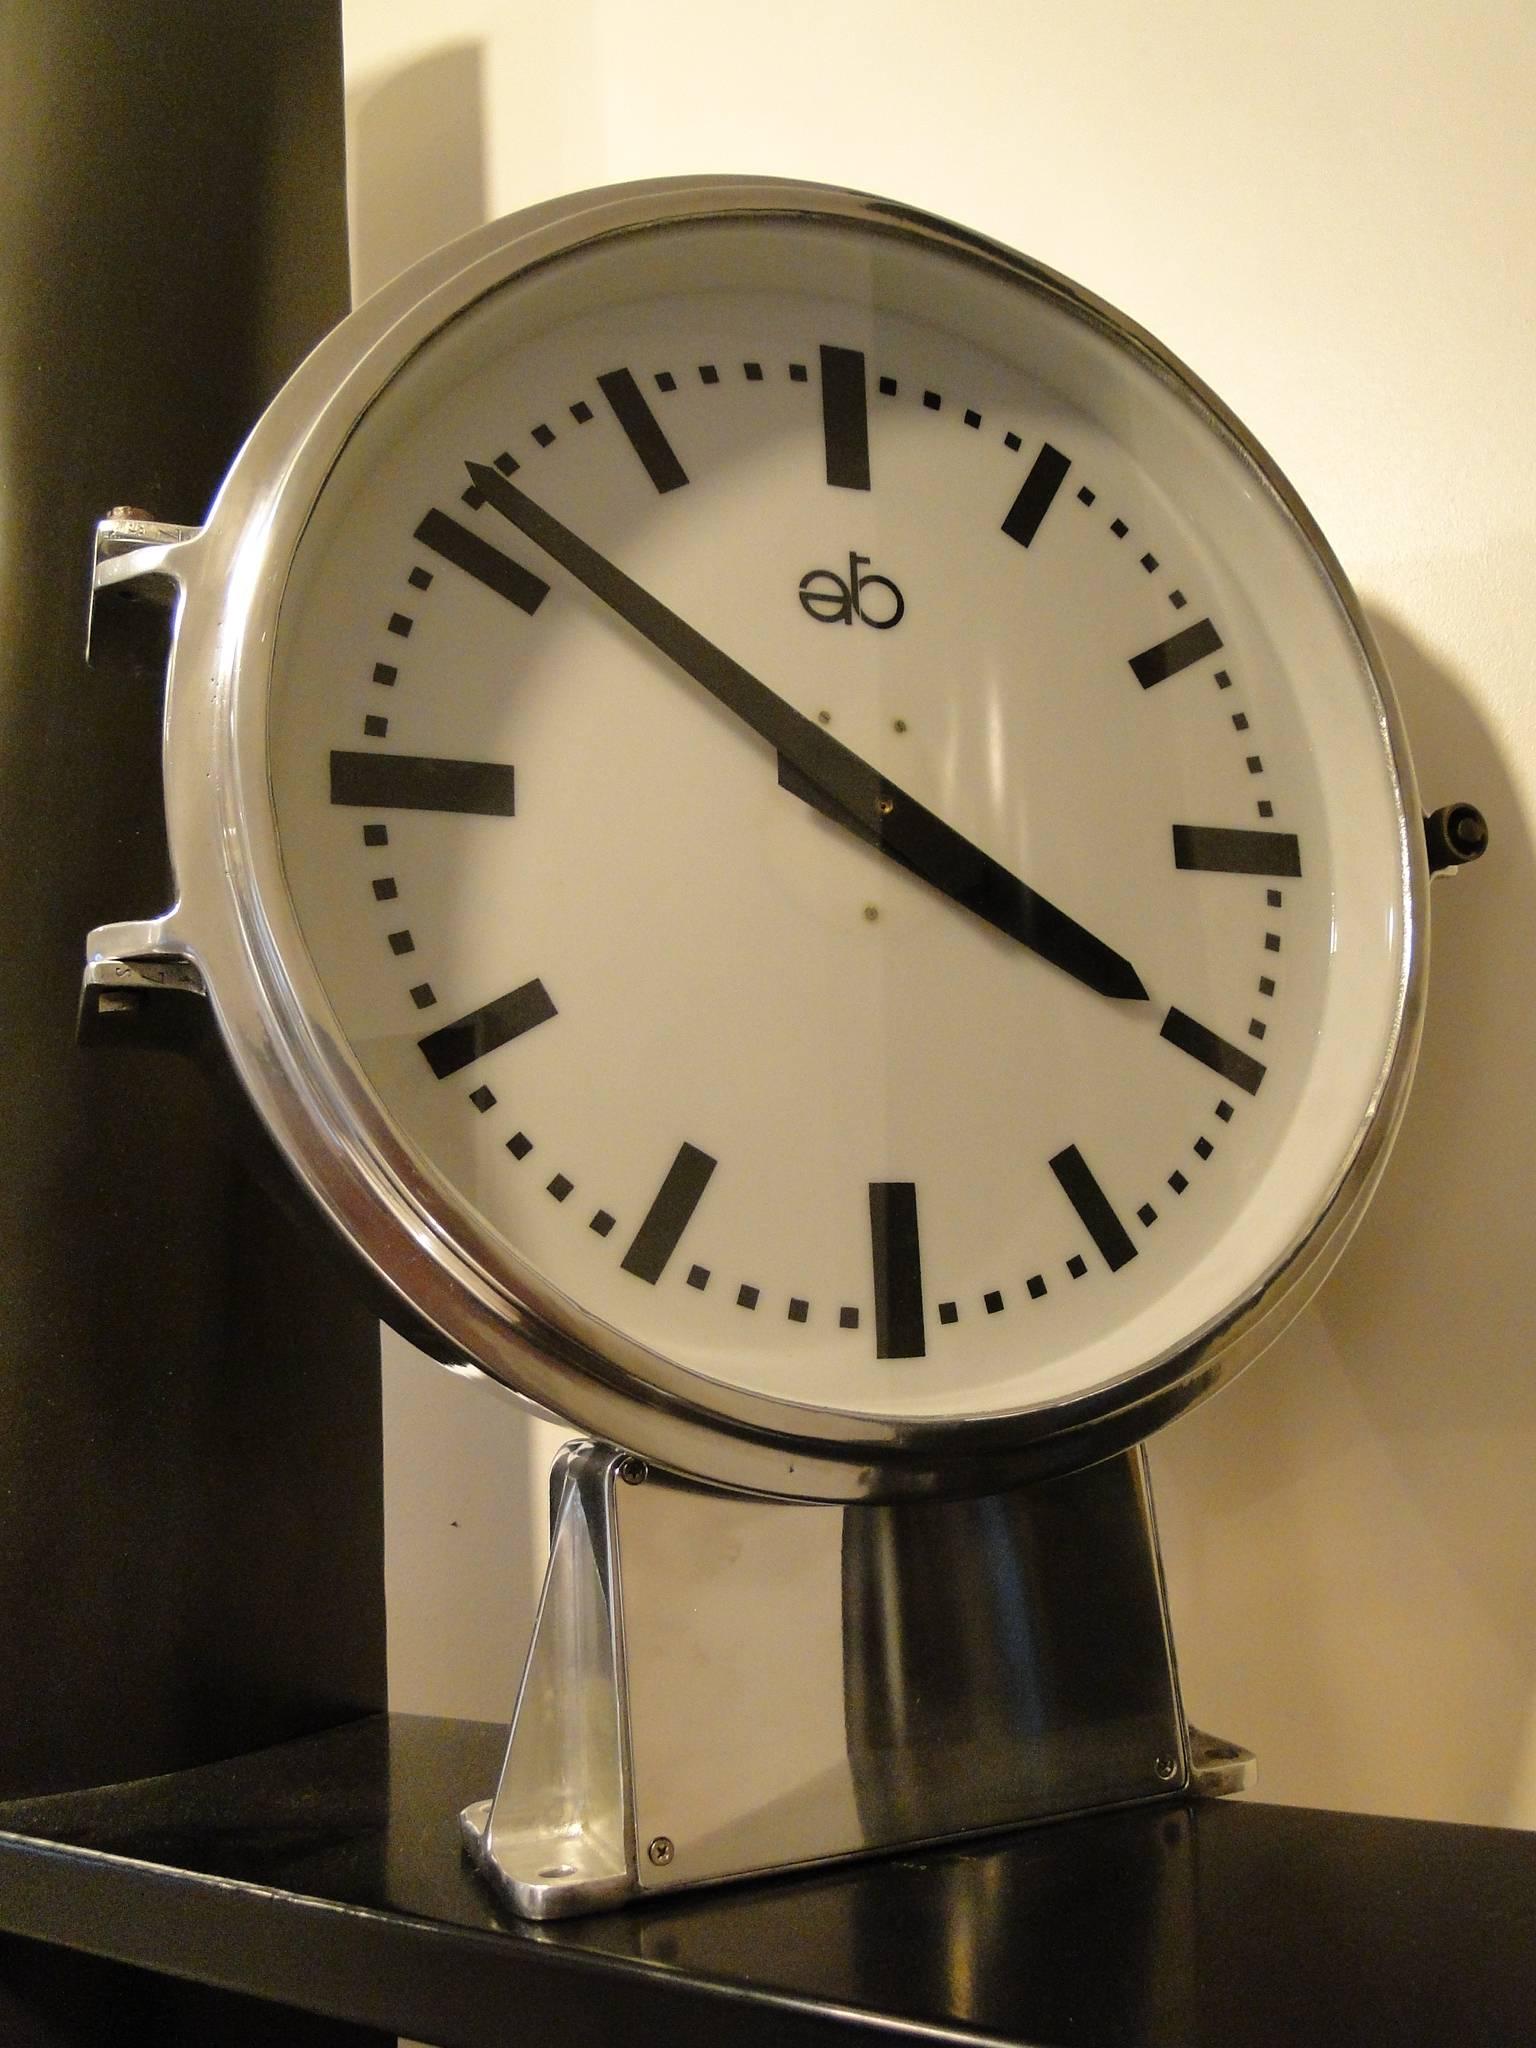 Vintage French Station-Railway-Factory ATO clock. One side with glass and lighting. The frame is made of aluminium. This famous clock measures 19.7